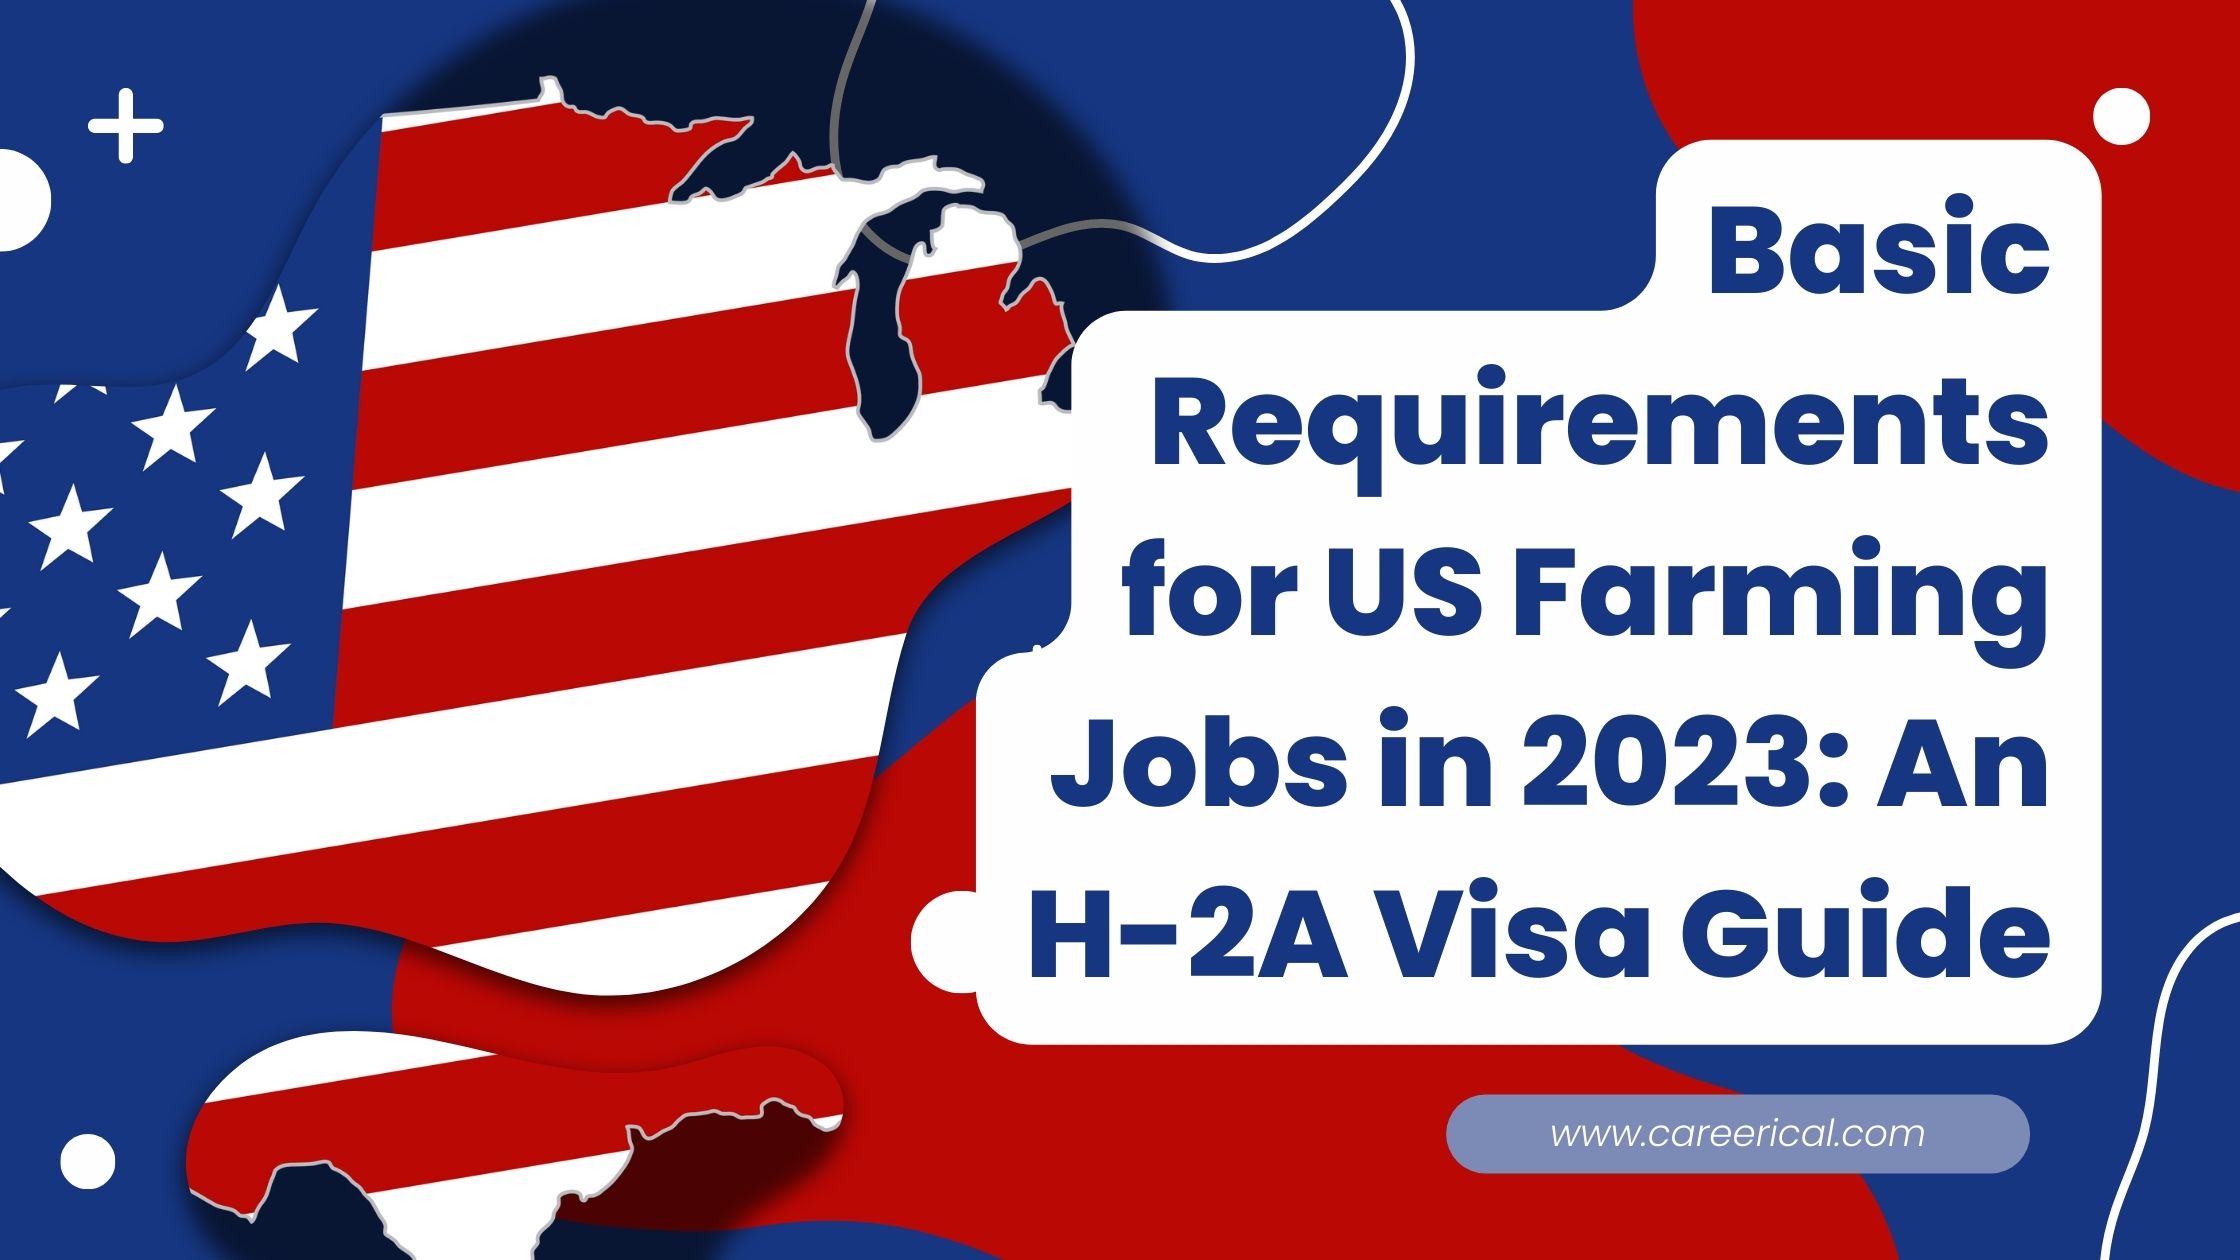 Basic Requirements for US Farming Jobs An H-2A Visa Guide